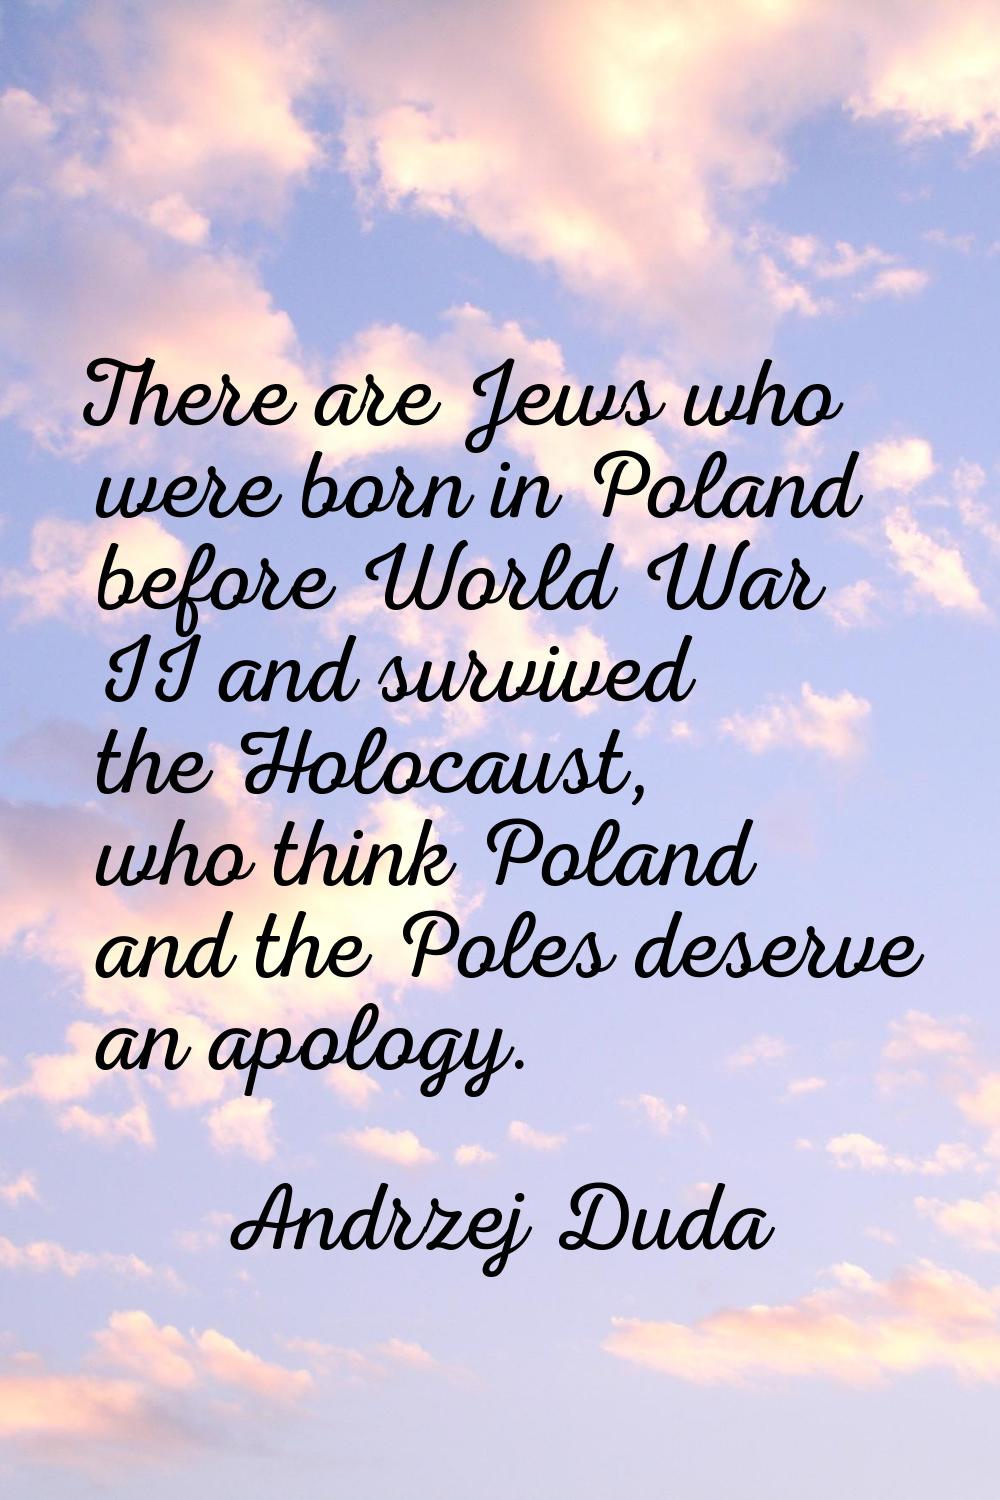 There are Jews who were born in Poland before World War II and survived the Holocaust, who think Po